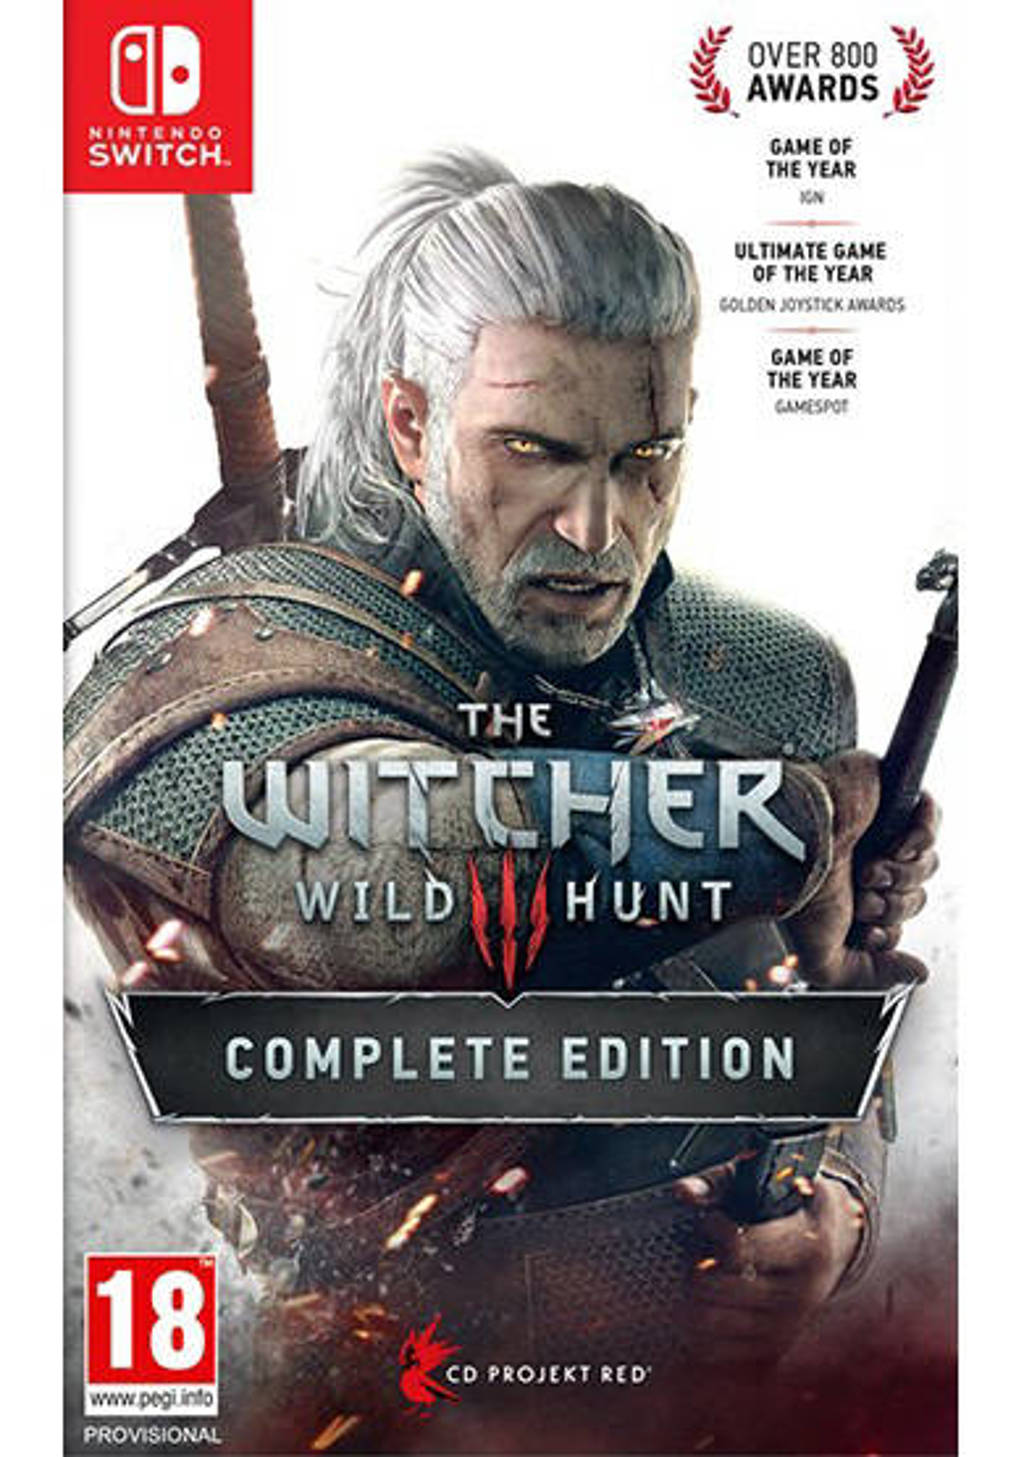 Witcher 3 - Wild hunt (Complete edition) (Nintendo Switch)